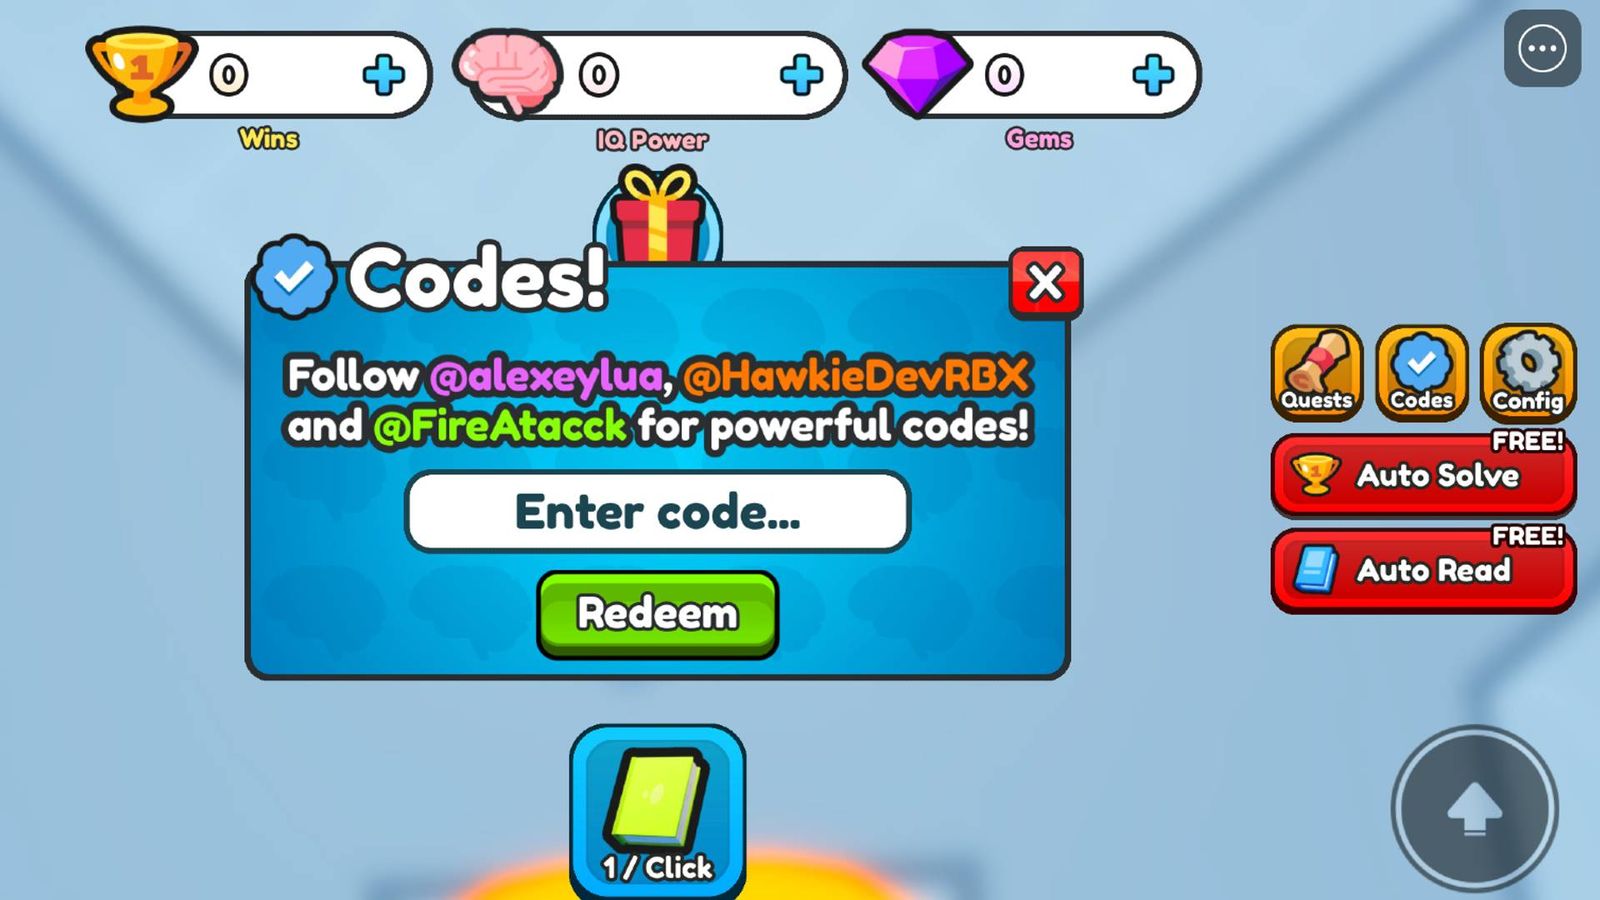 The code redemption screen in IQ Wars Simulator on Roblox.